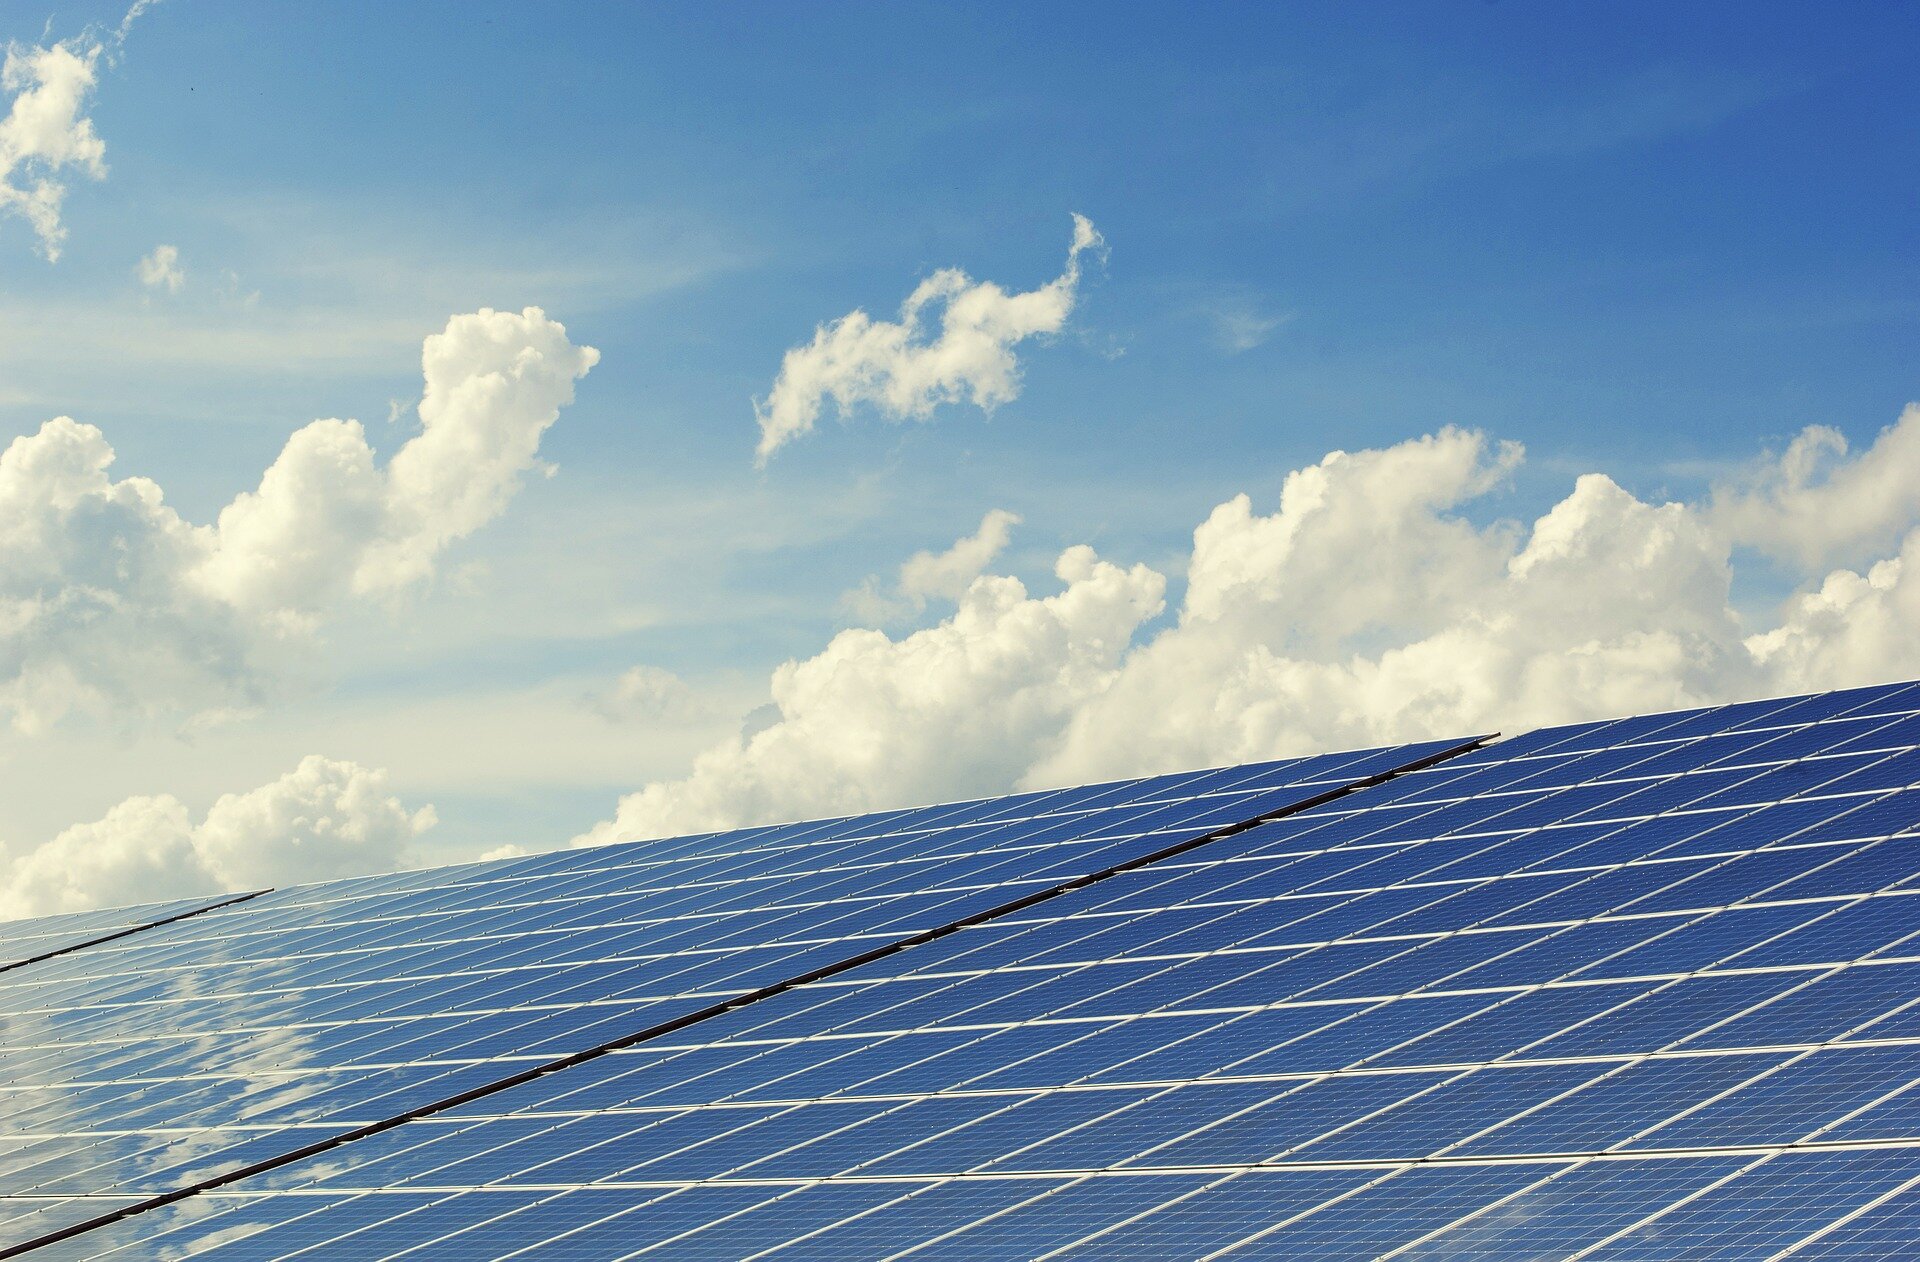 Florida Solar Power Explained: Net Metering Rates, Rebates, and Energy Storage Solutions